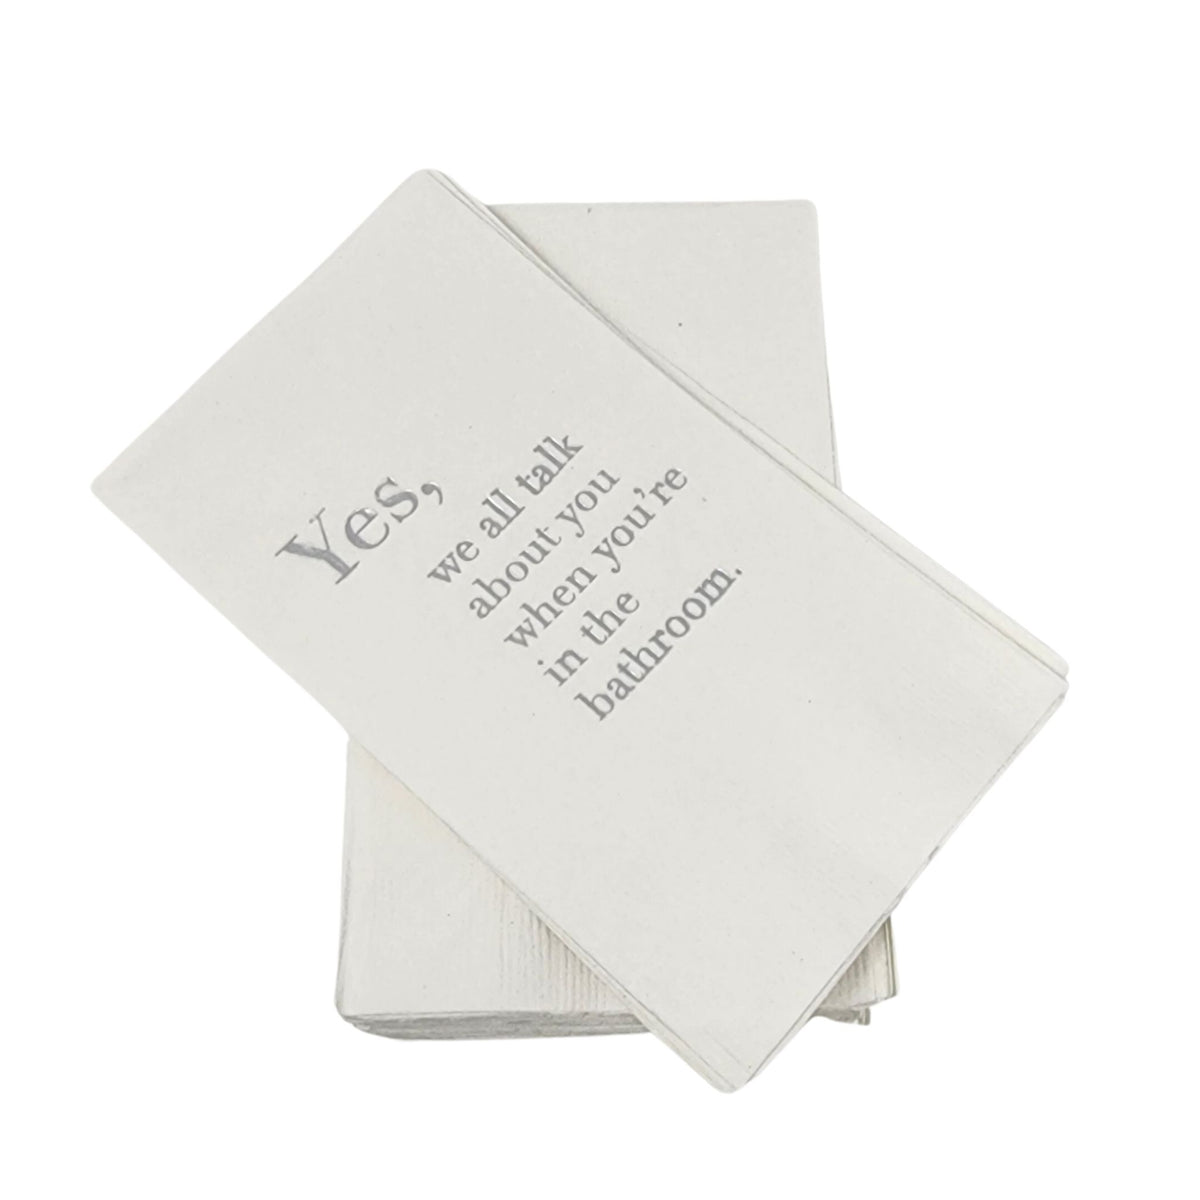 Guest Towel Pack - Talking About You